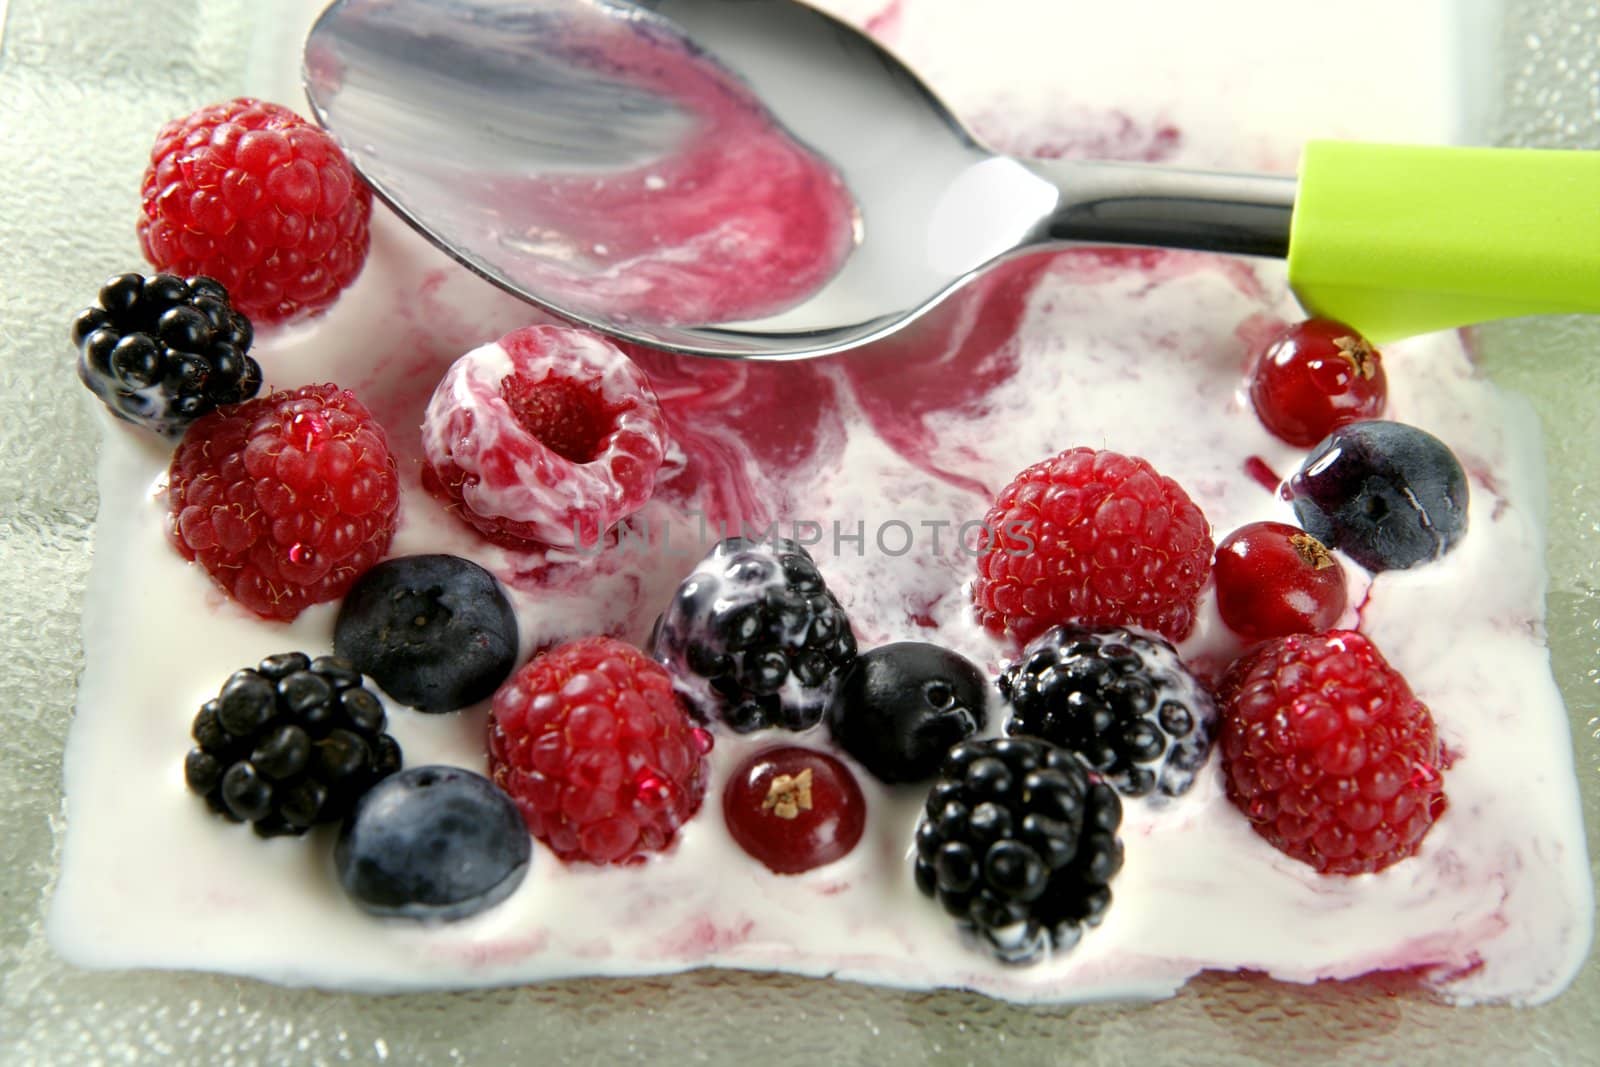 Dessert of mixed and varied berries and cream